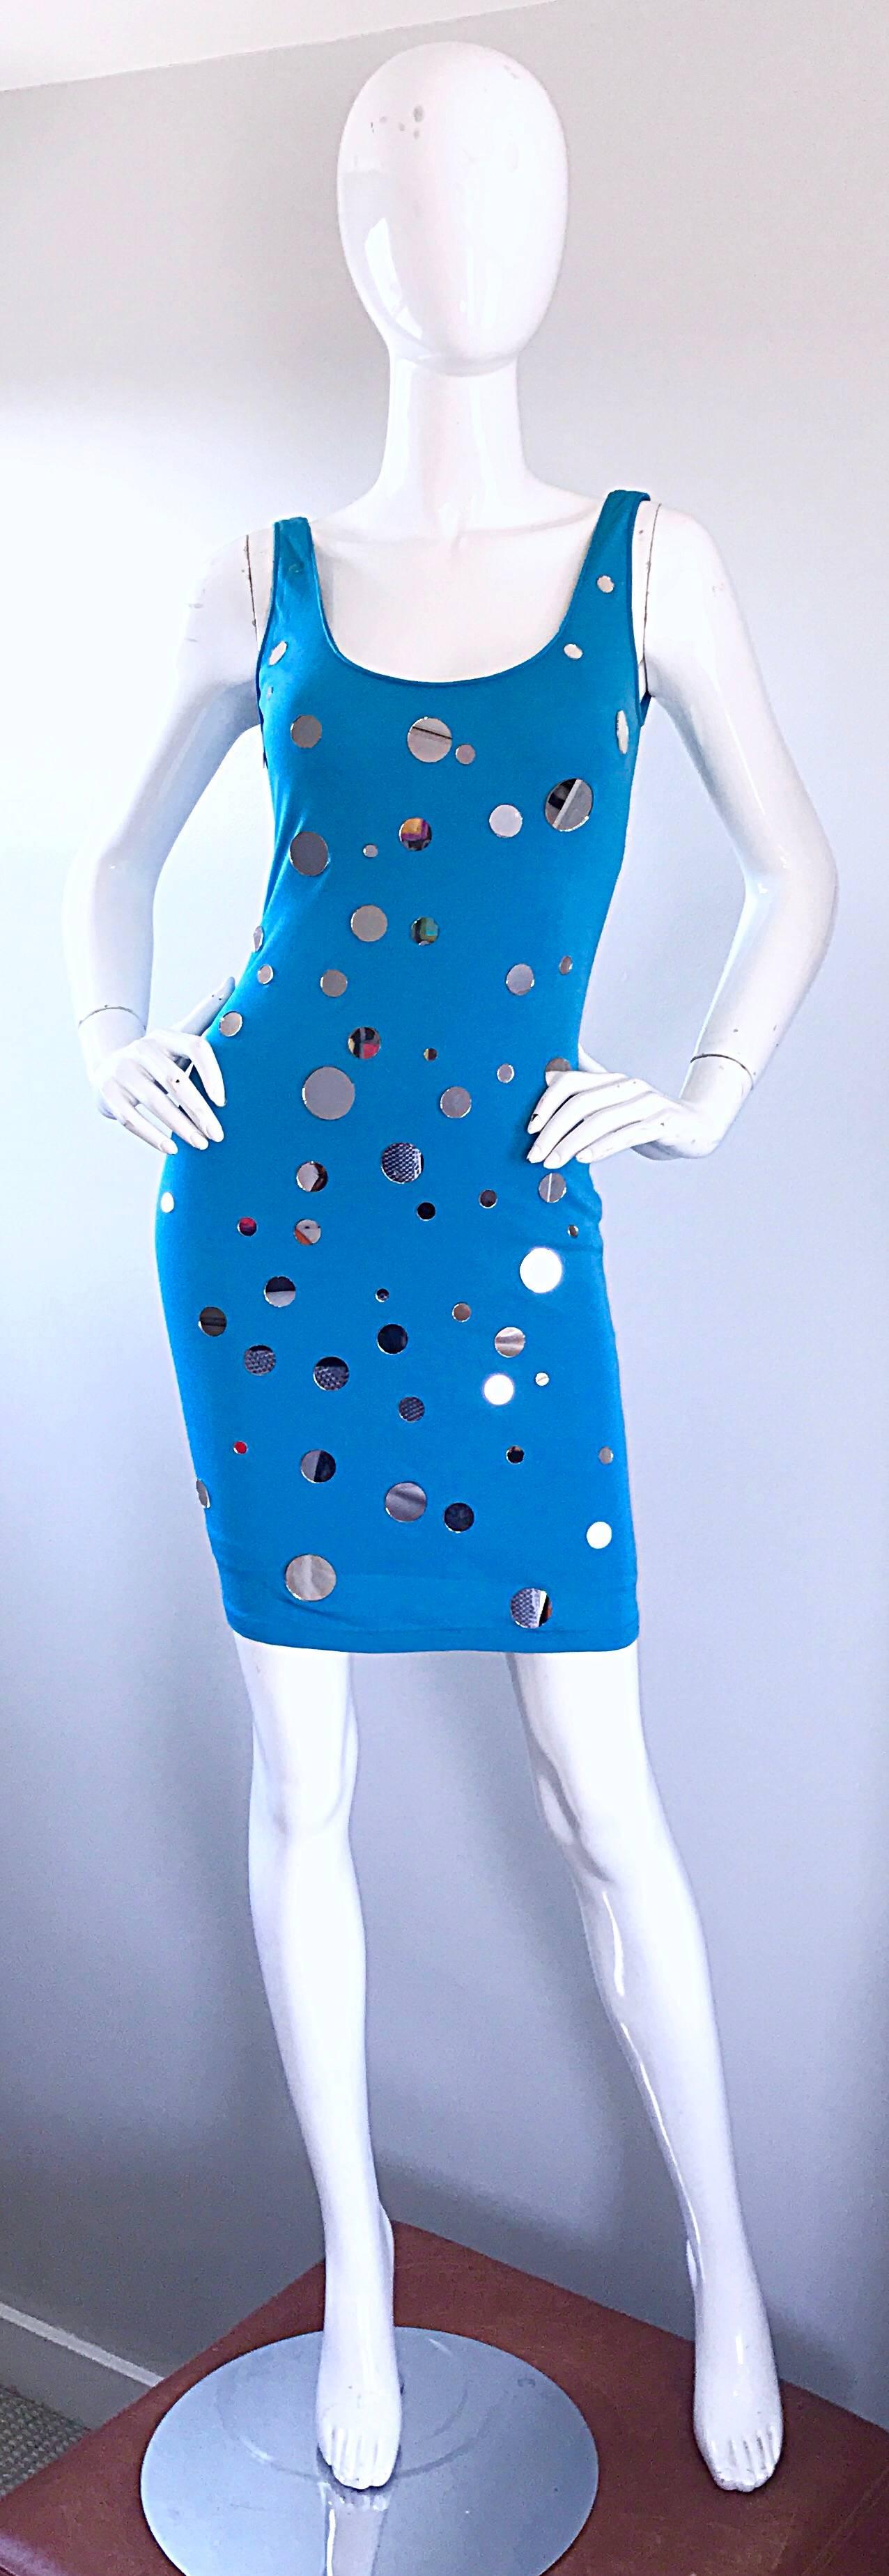 Documented C.D. Greene Turquoise Teal Blue Vintage Mirrored Bodycon Beaded Dress 5